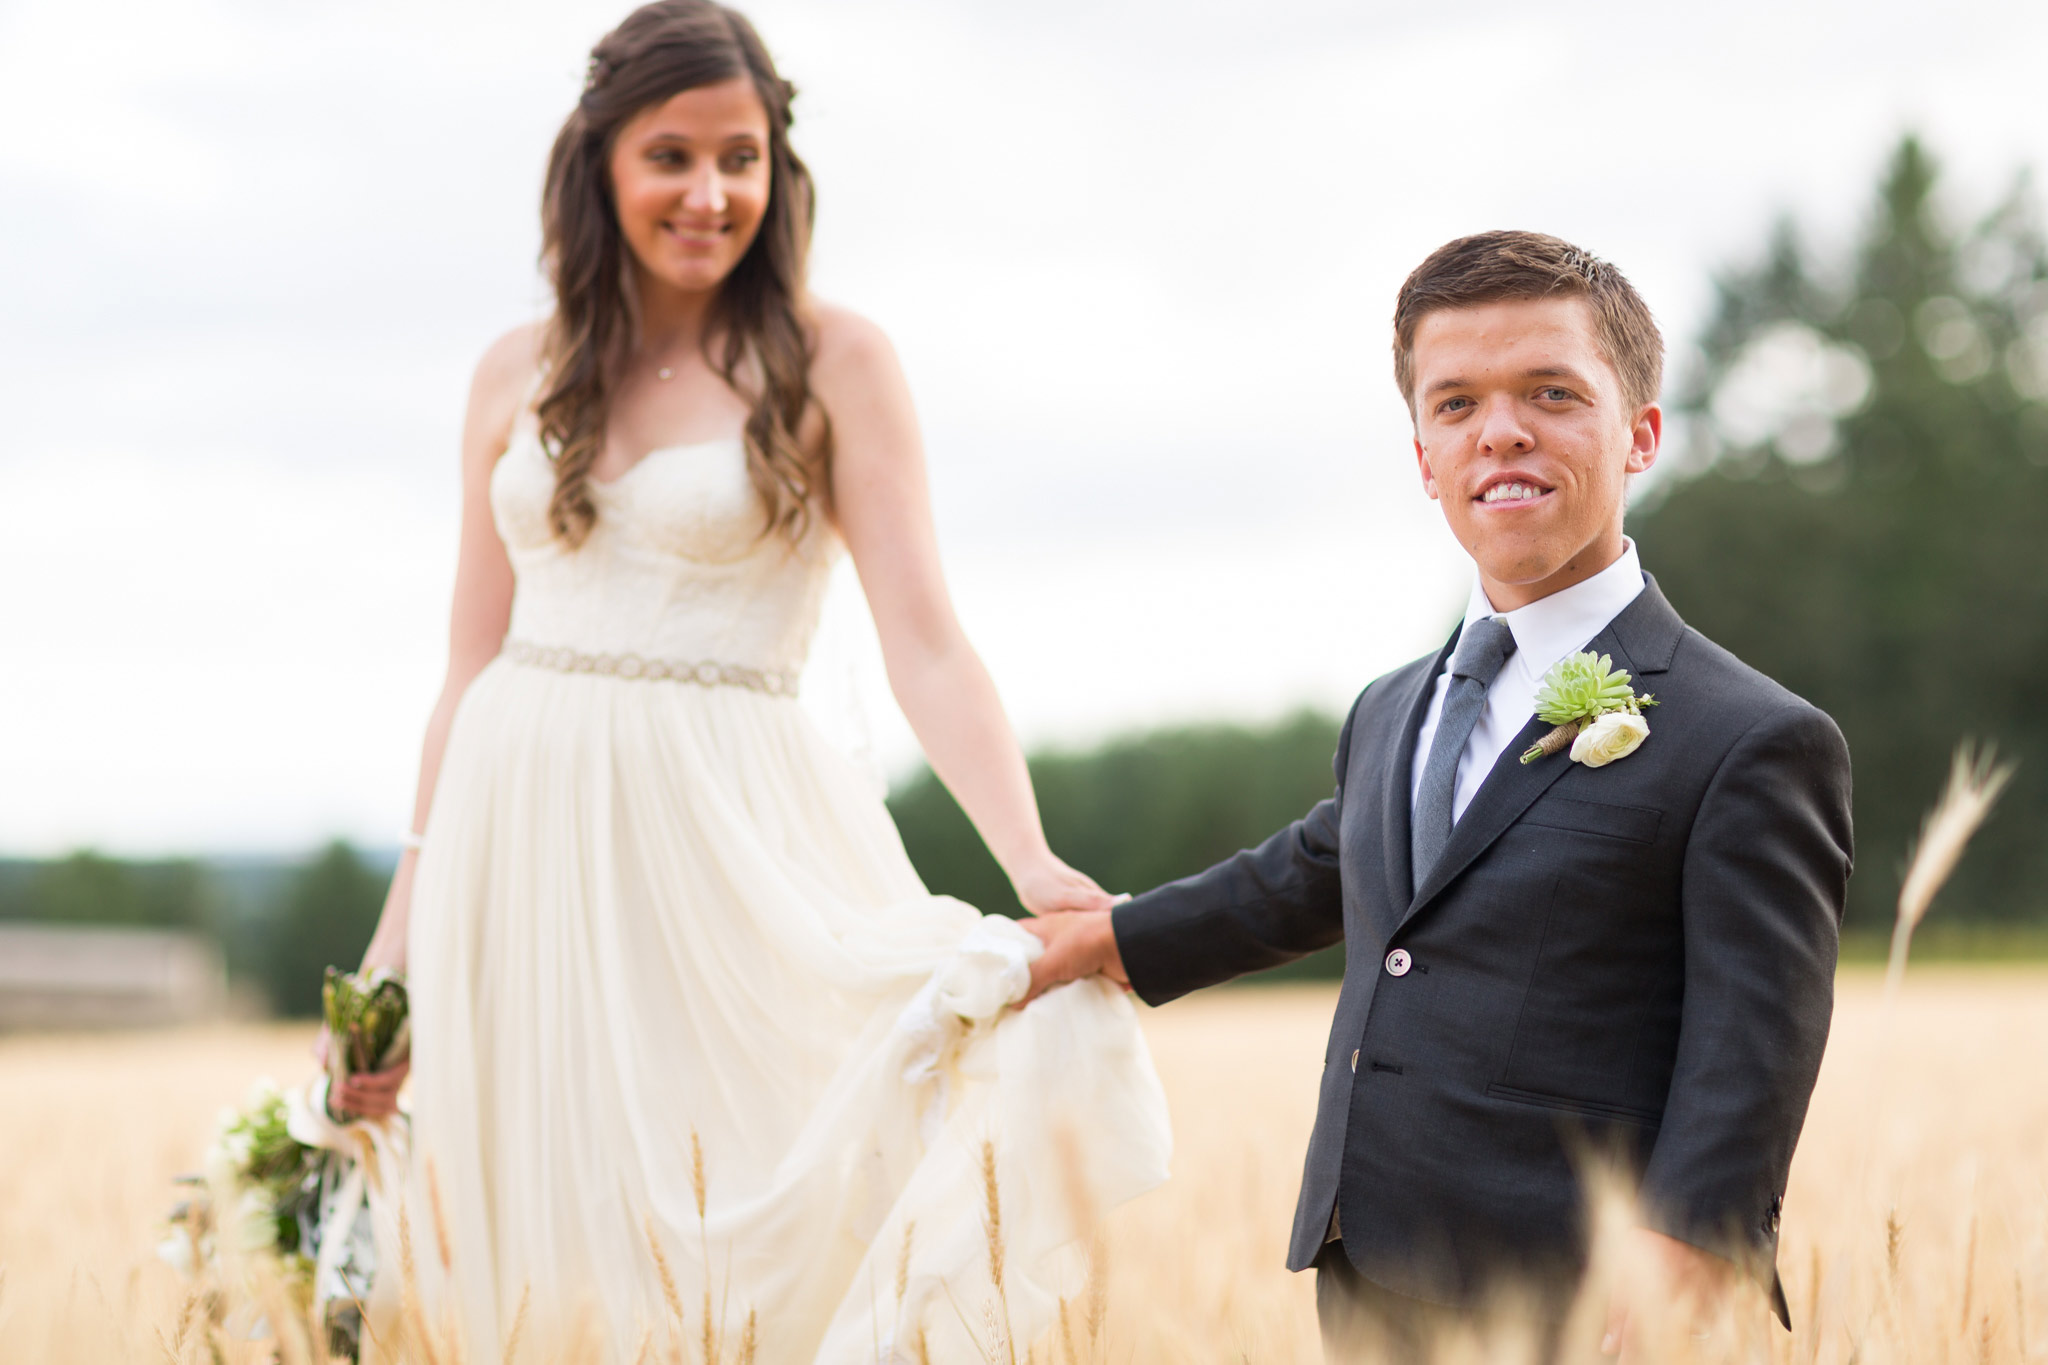 Tori and Zach Roloff in a special episode of ‘Little People, Big World’ (Courtesy of TLC)